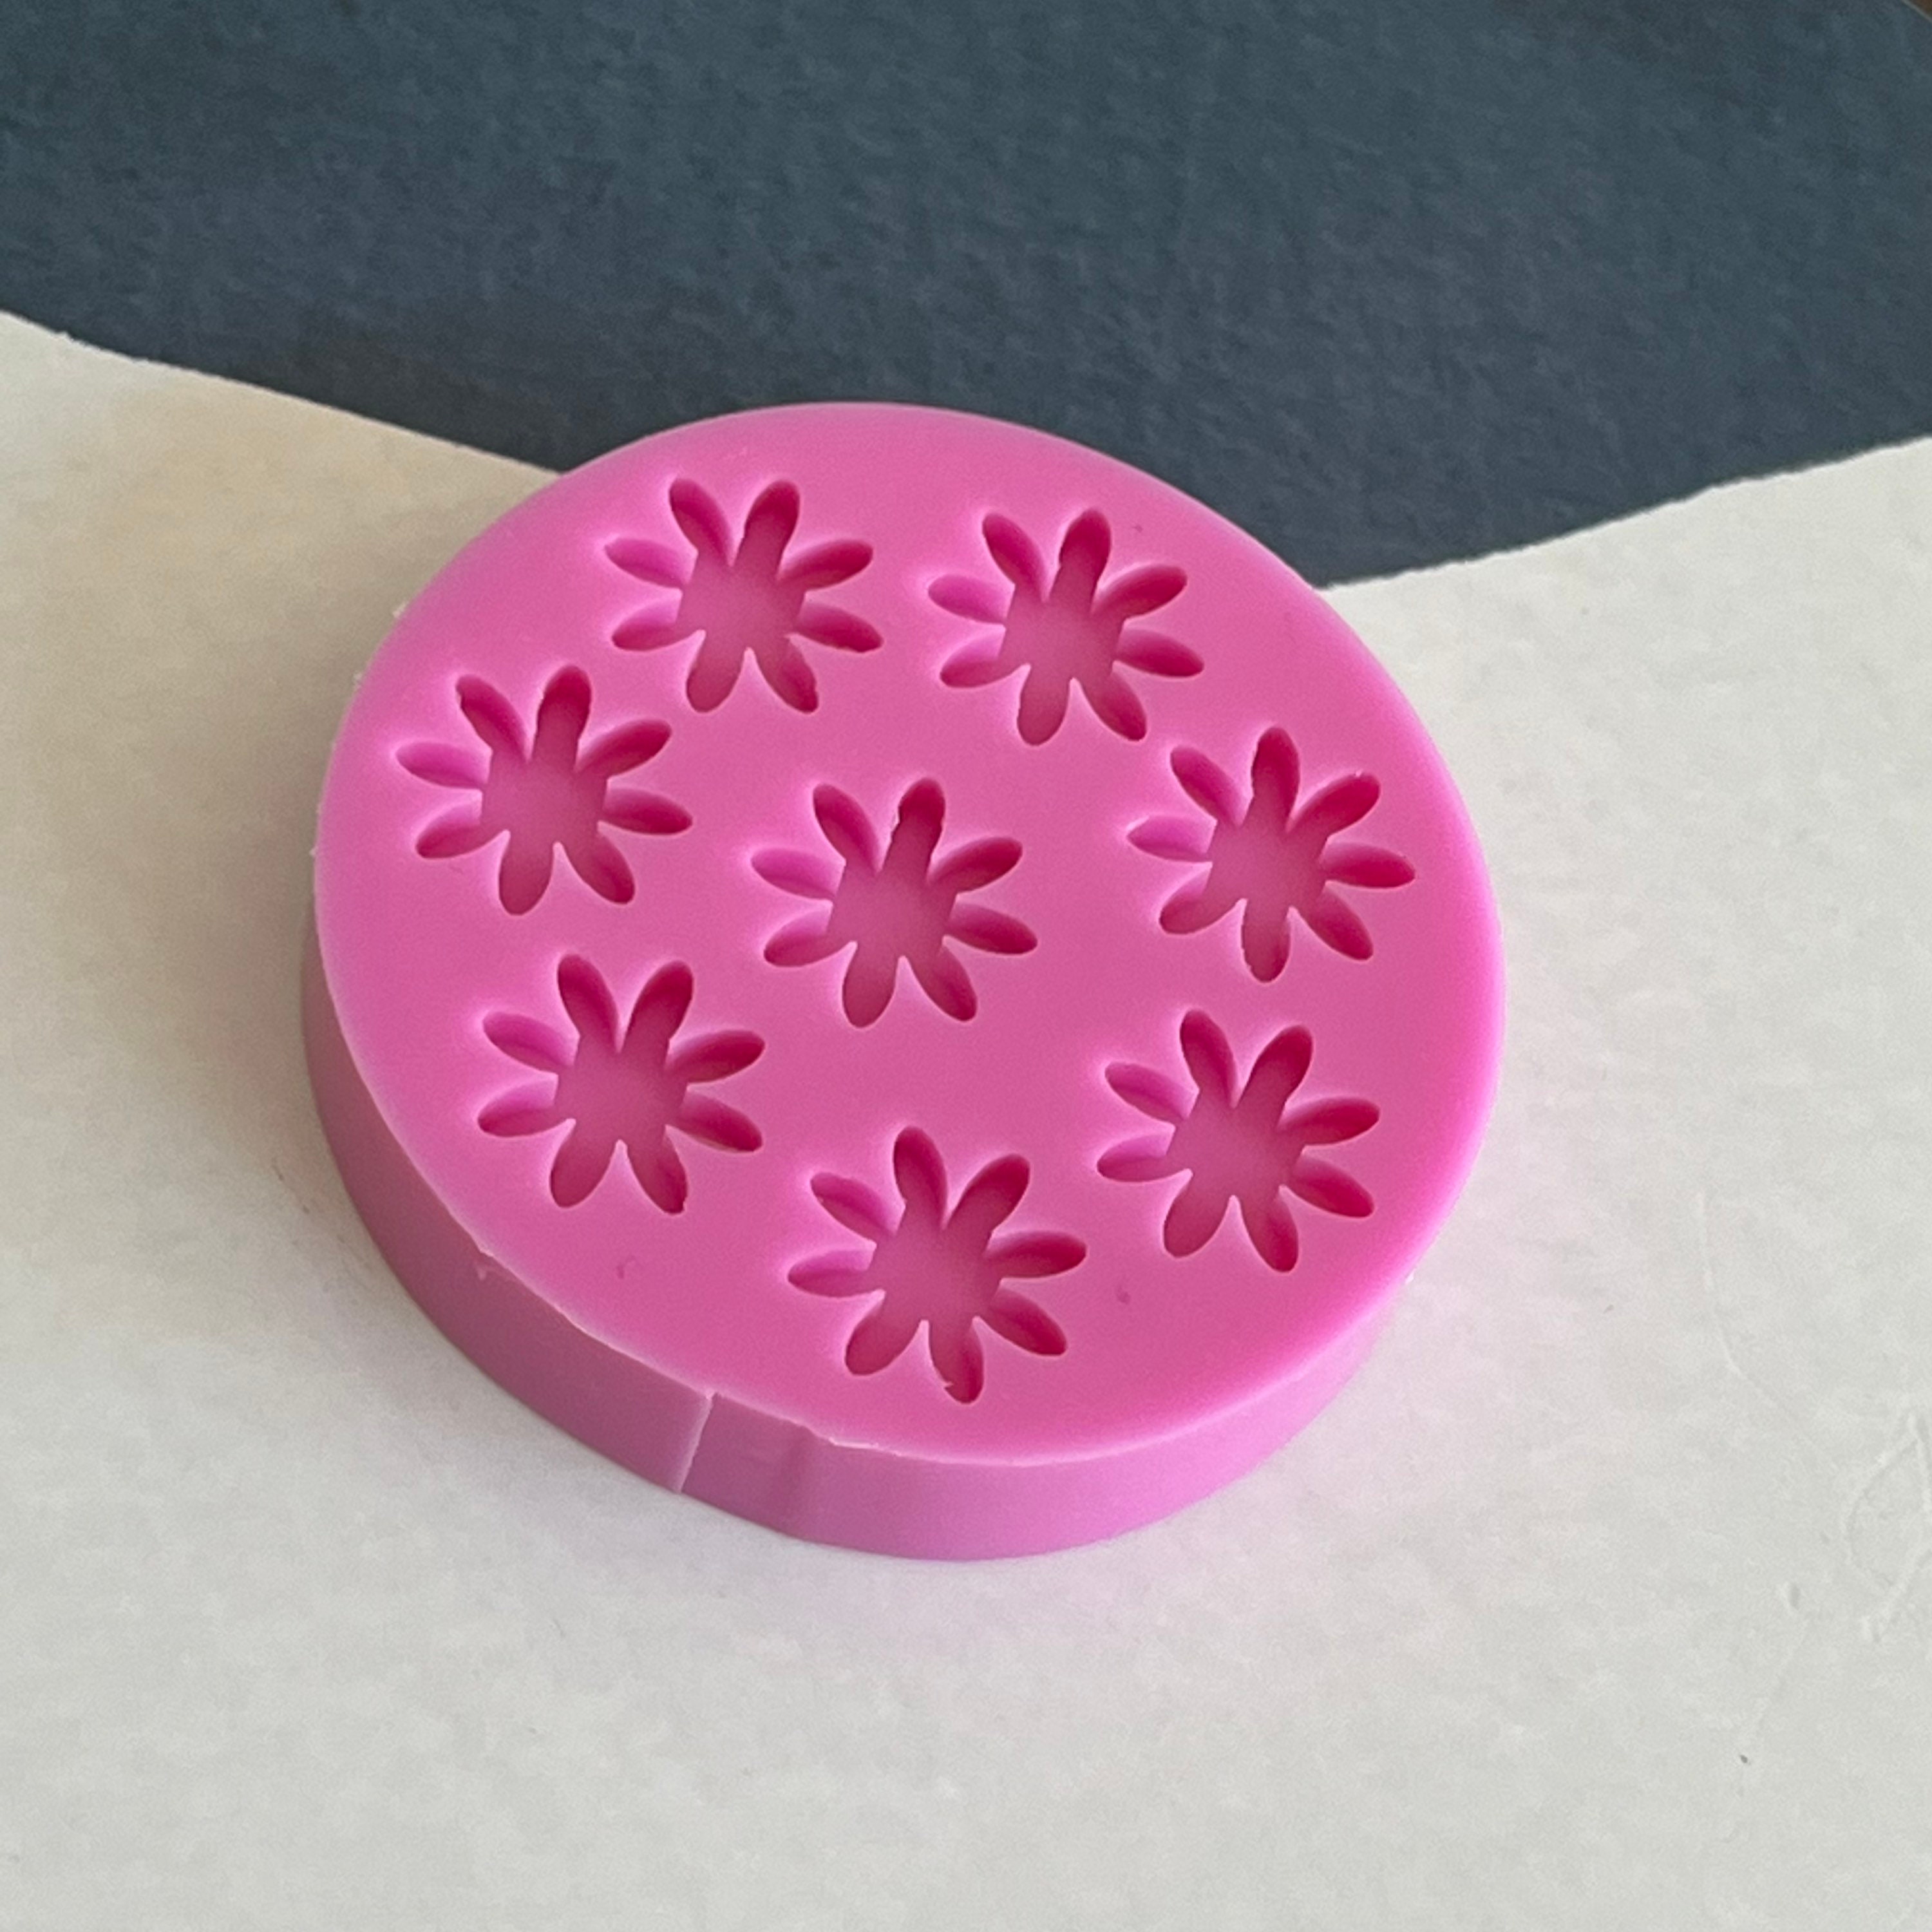 16 pieces 10mm Circle Silicone Mold/Mould, Silicone Mold, Resin Mould,  Earring Moulds, Earring Mold